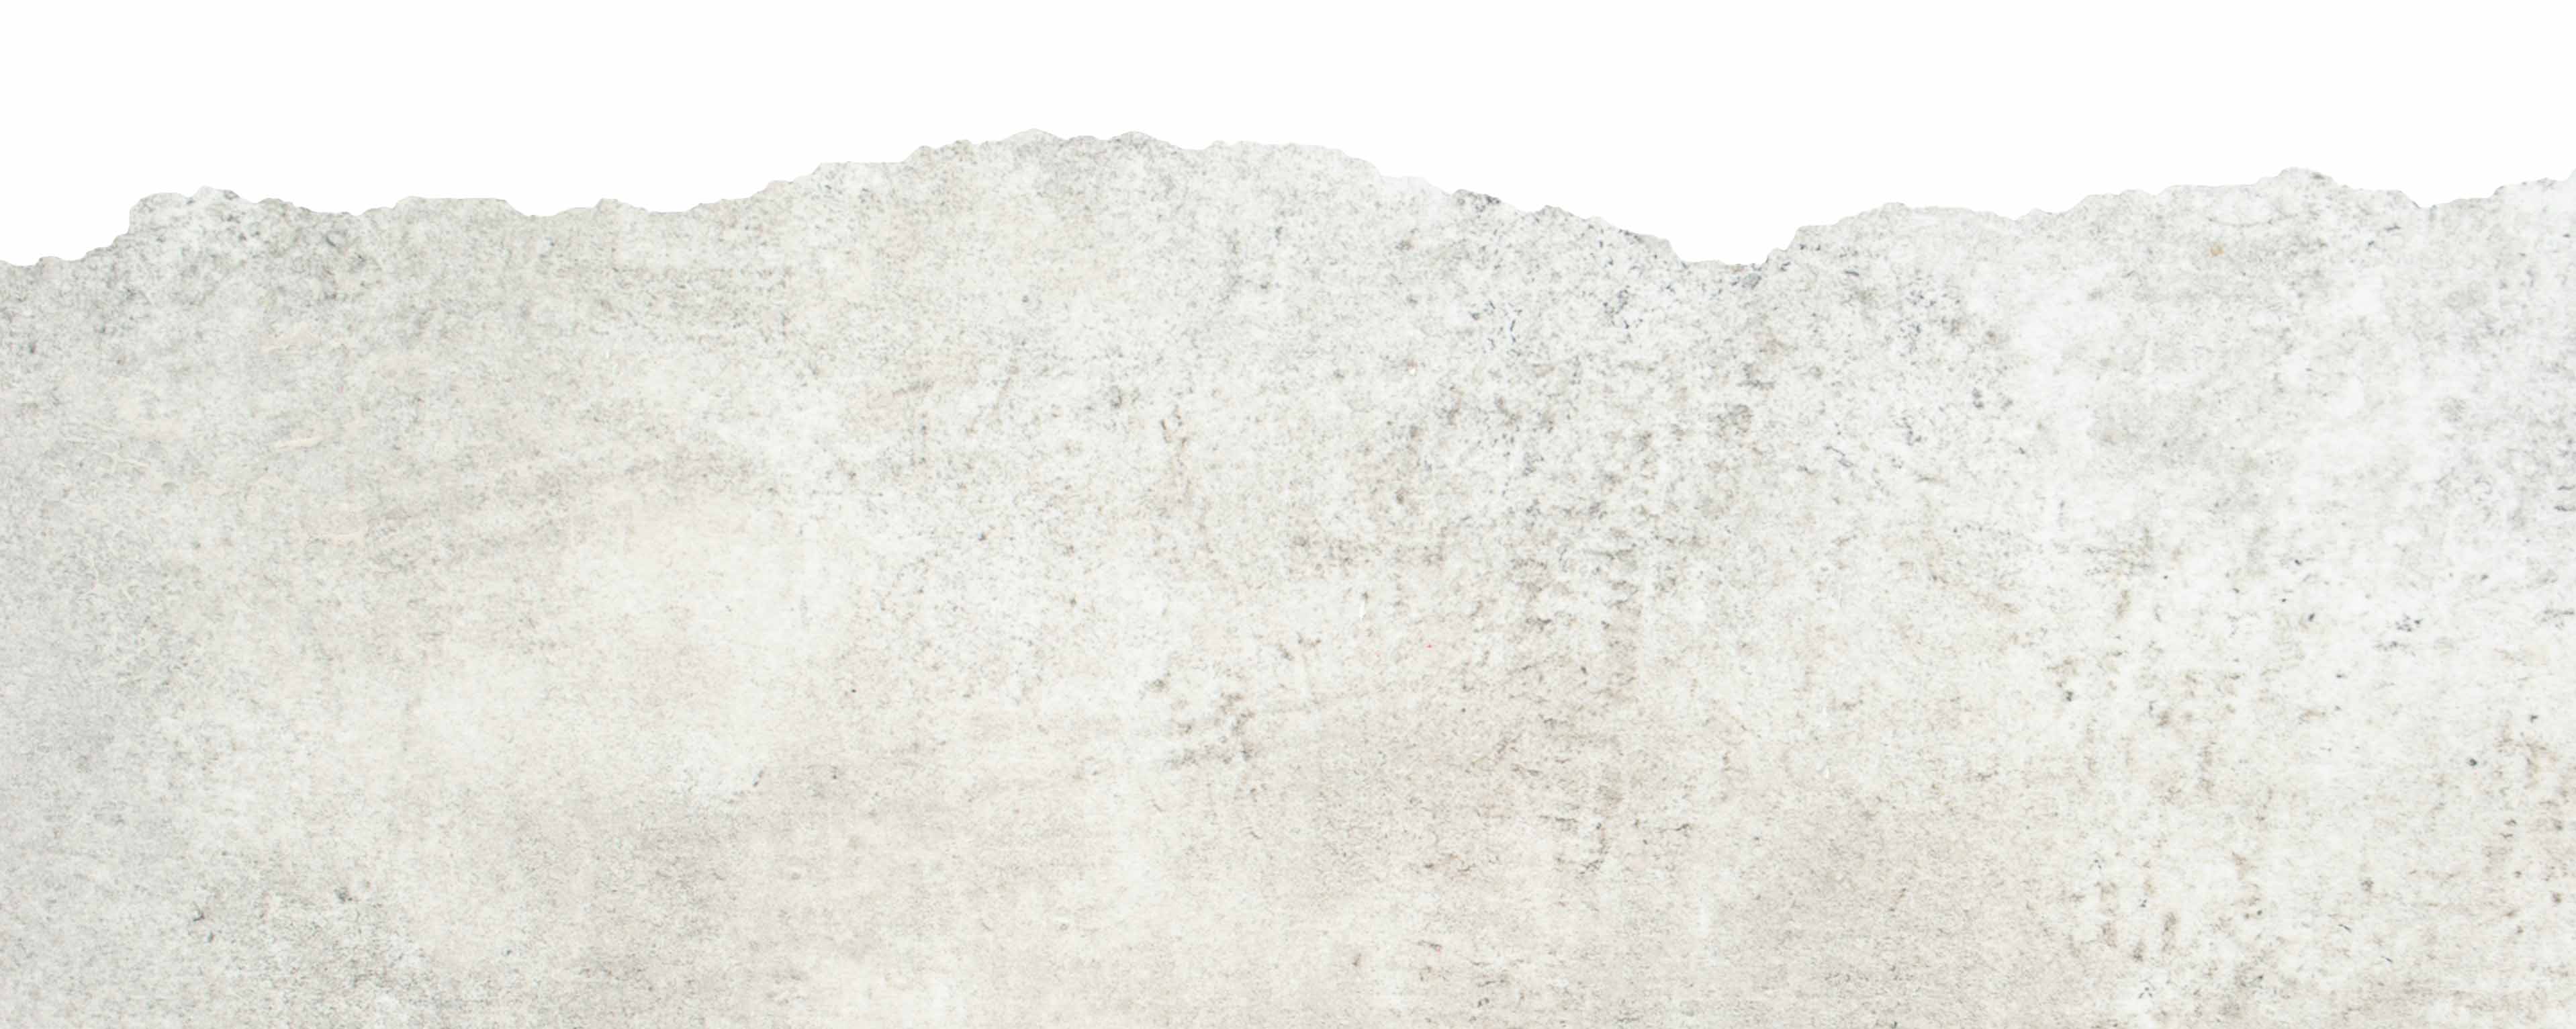 A concrete texture background with an uneven edge for the top.